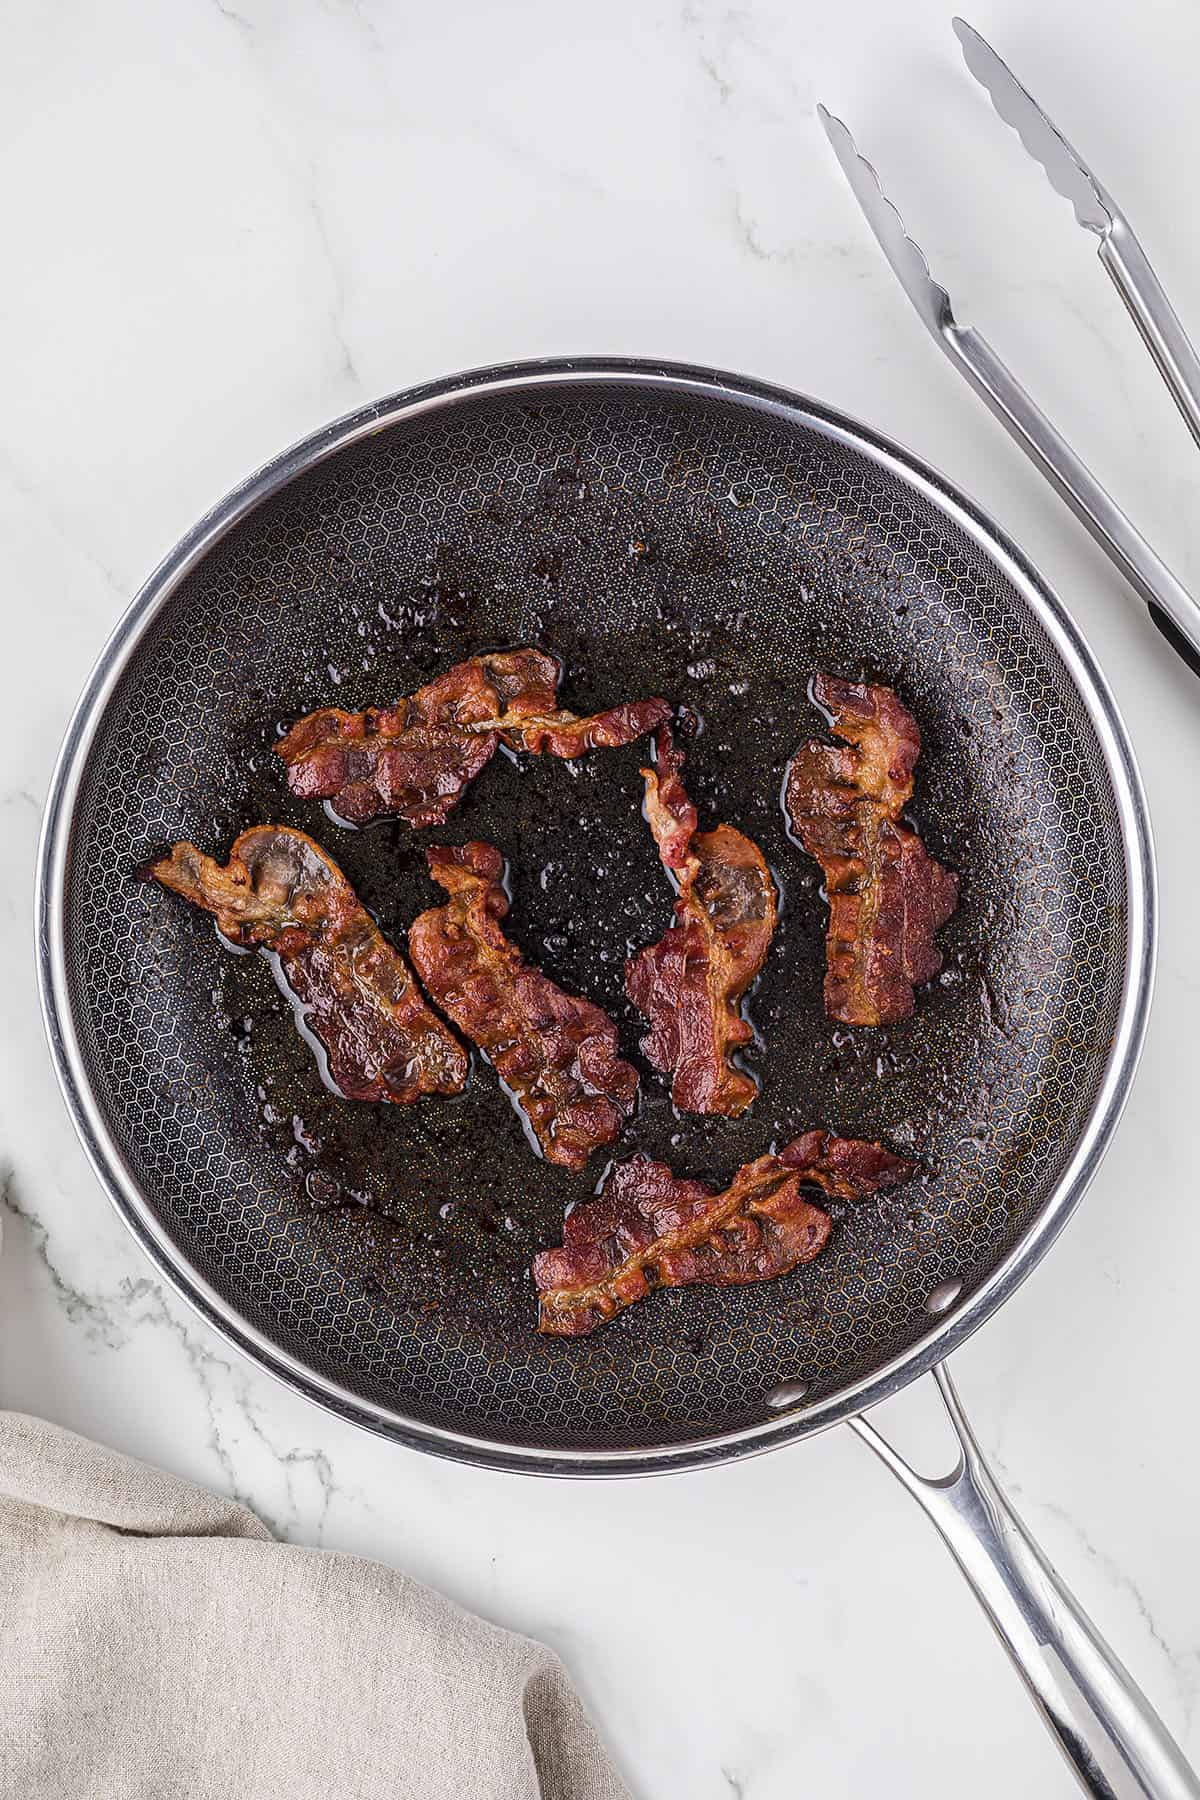 Bacon being fried in a skillet.